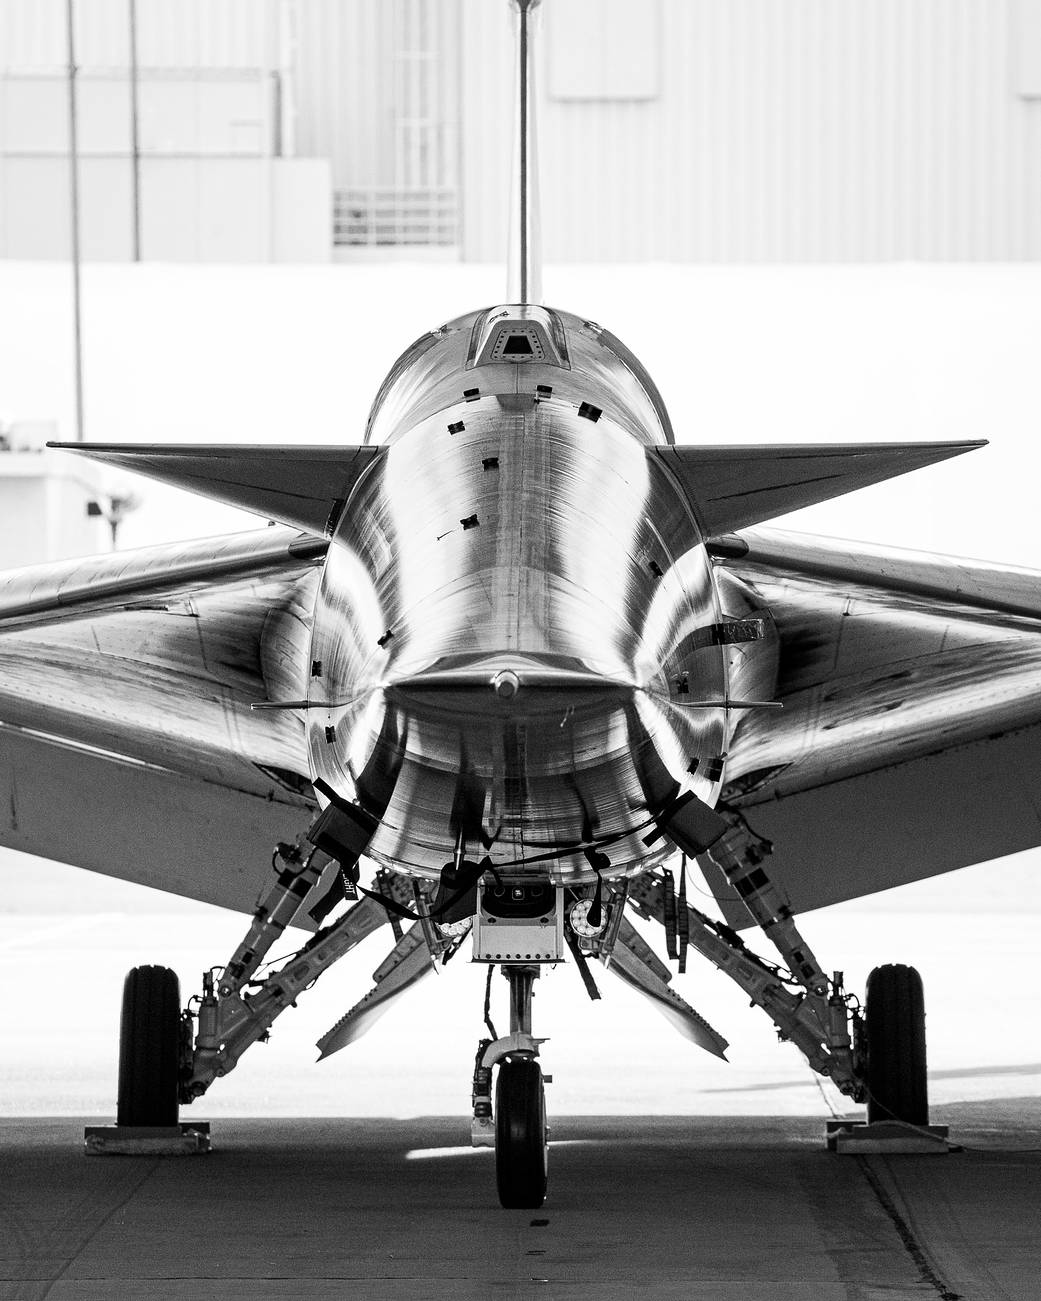 NASA's X-59 parked inside the hangar with a head-on view.